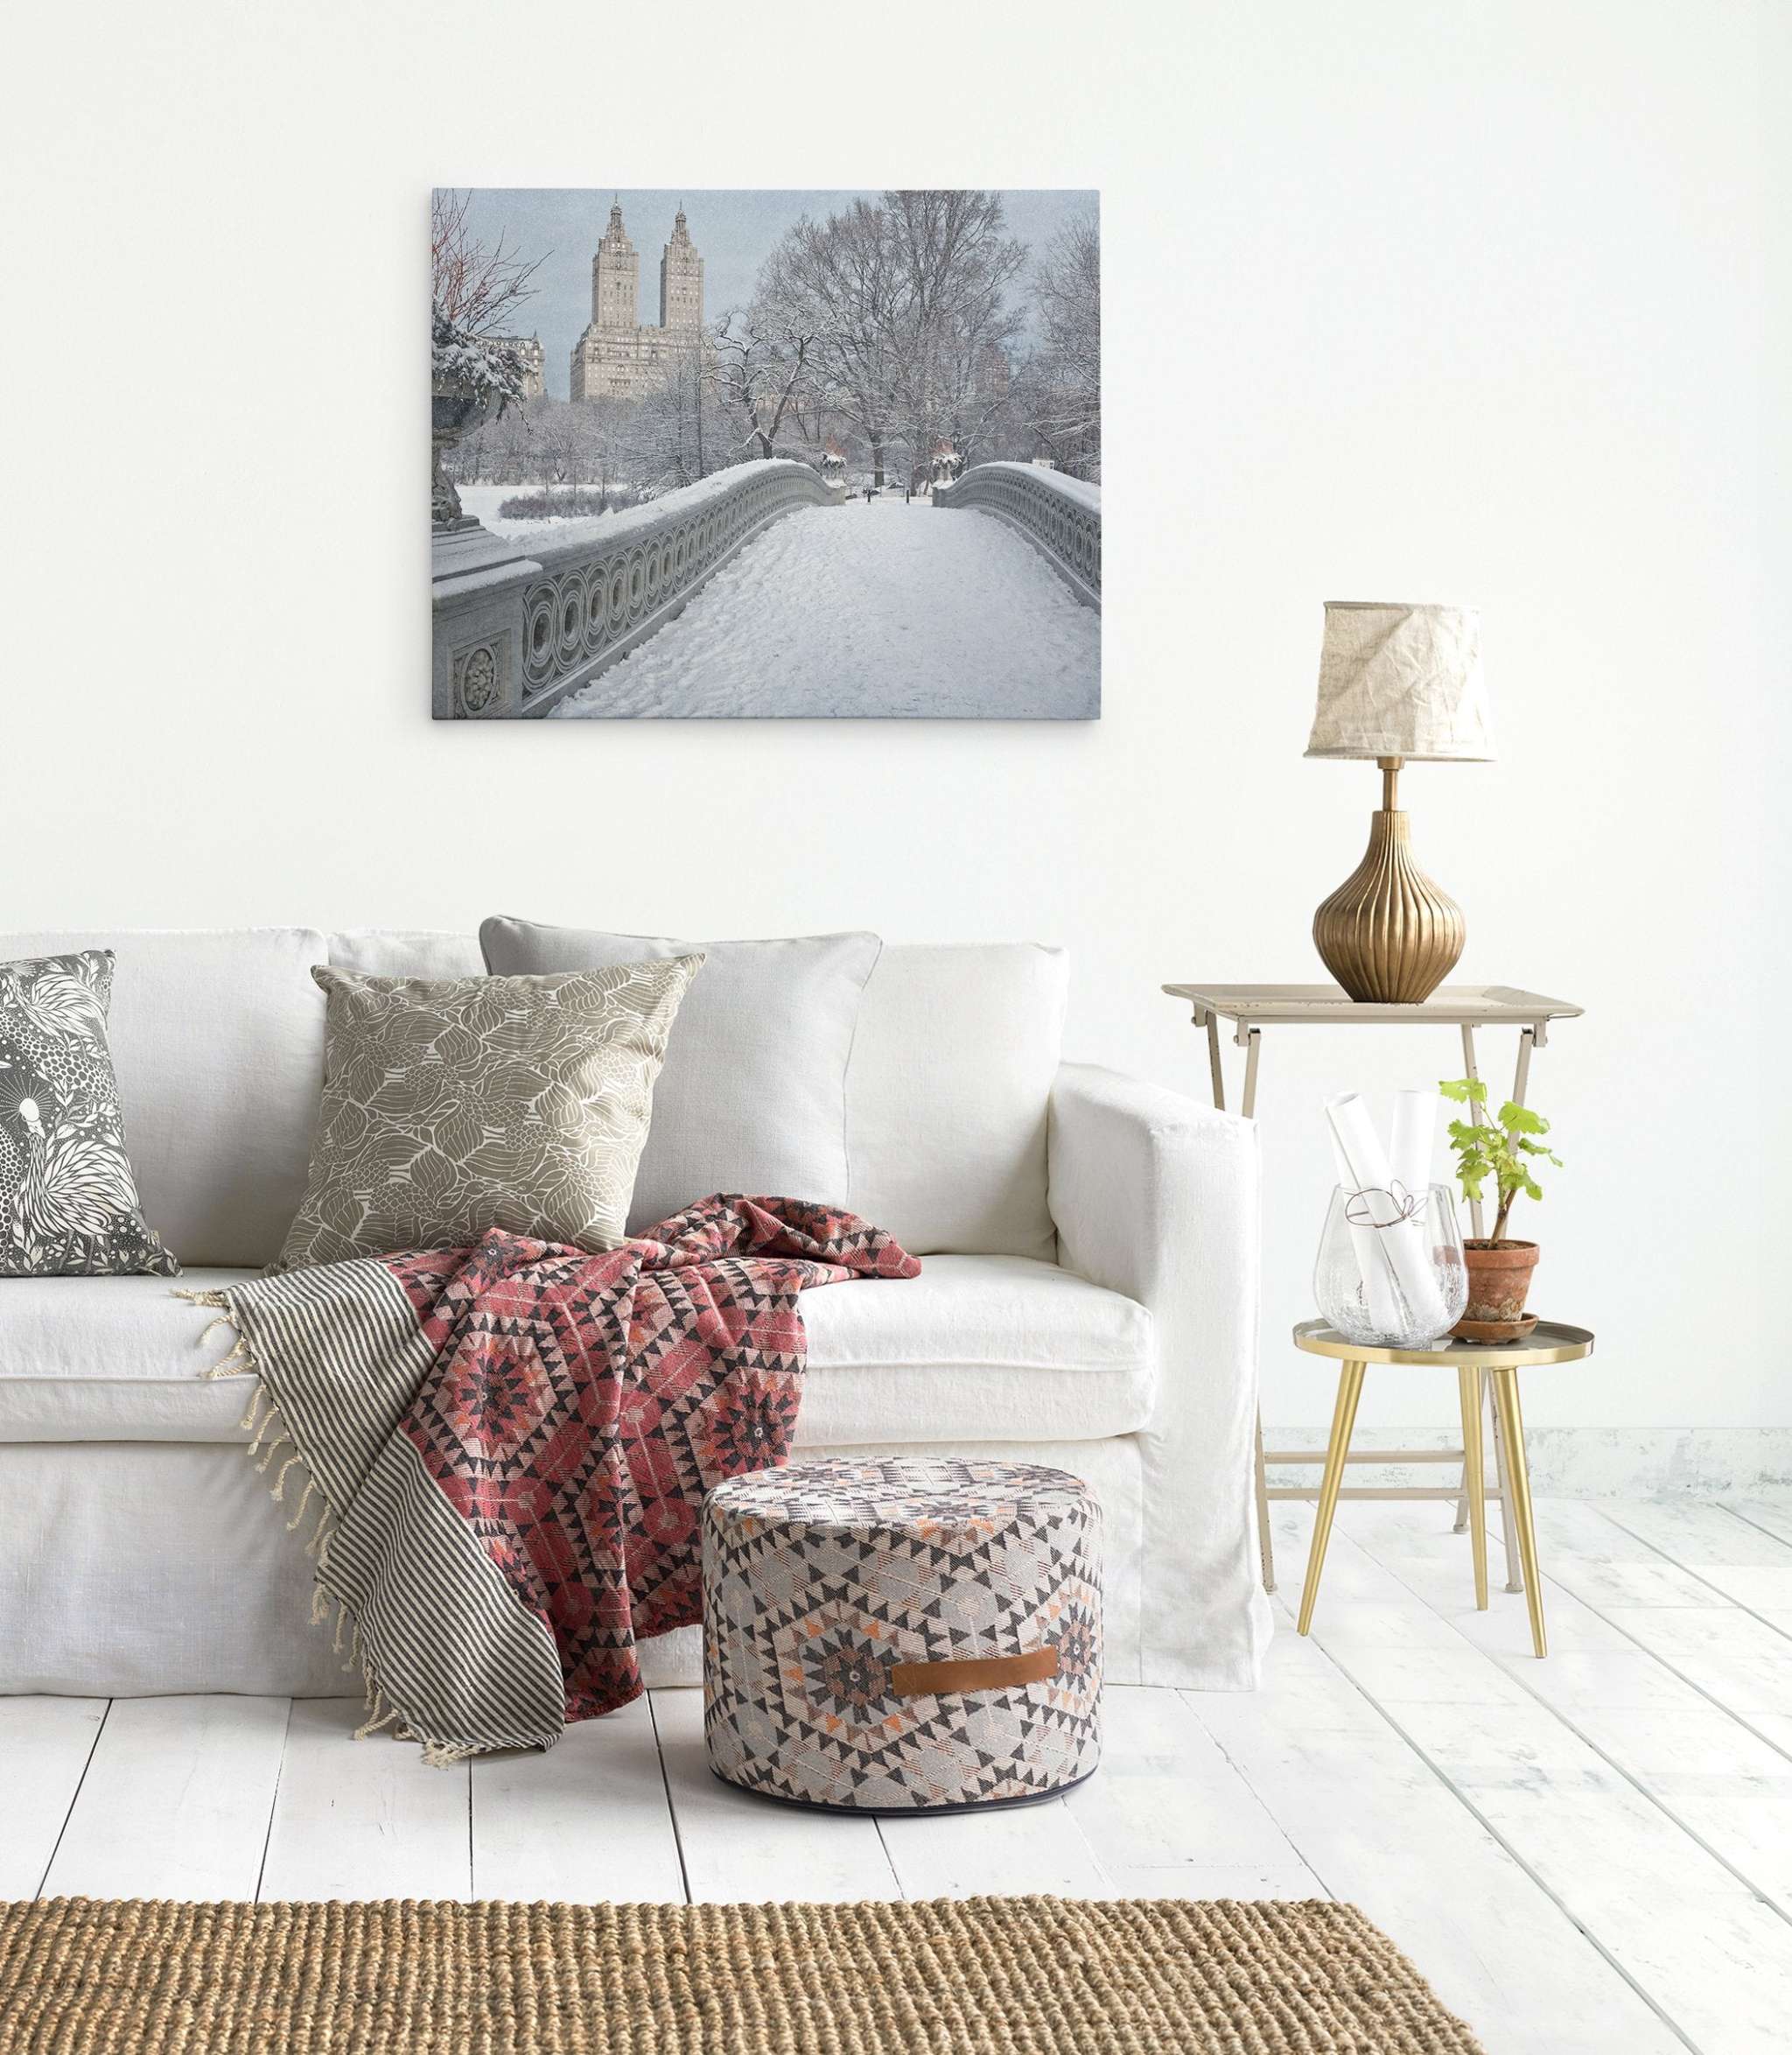 A cozy living room features a light beige sofa adorned with patterned pillows and a red and gray blanket. A patterned ottoman and rug complement the space. Beside the sofa is a small table with a lamp, plant, and books. An Offley Green New York City Canvas Wall Art, &#39;Snow on Bow Bridge&#39; hangs on the white wall.